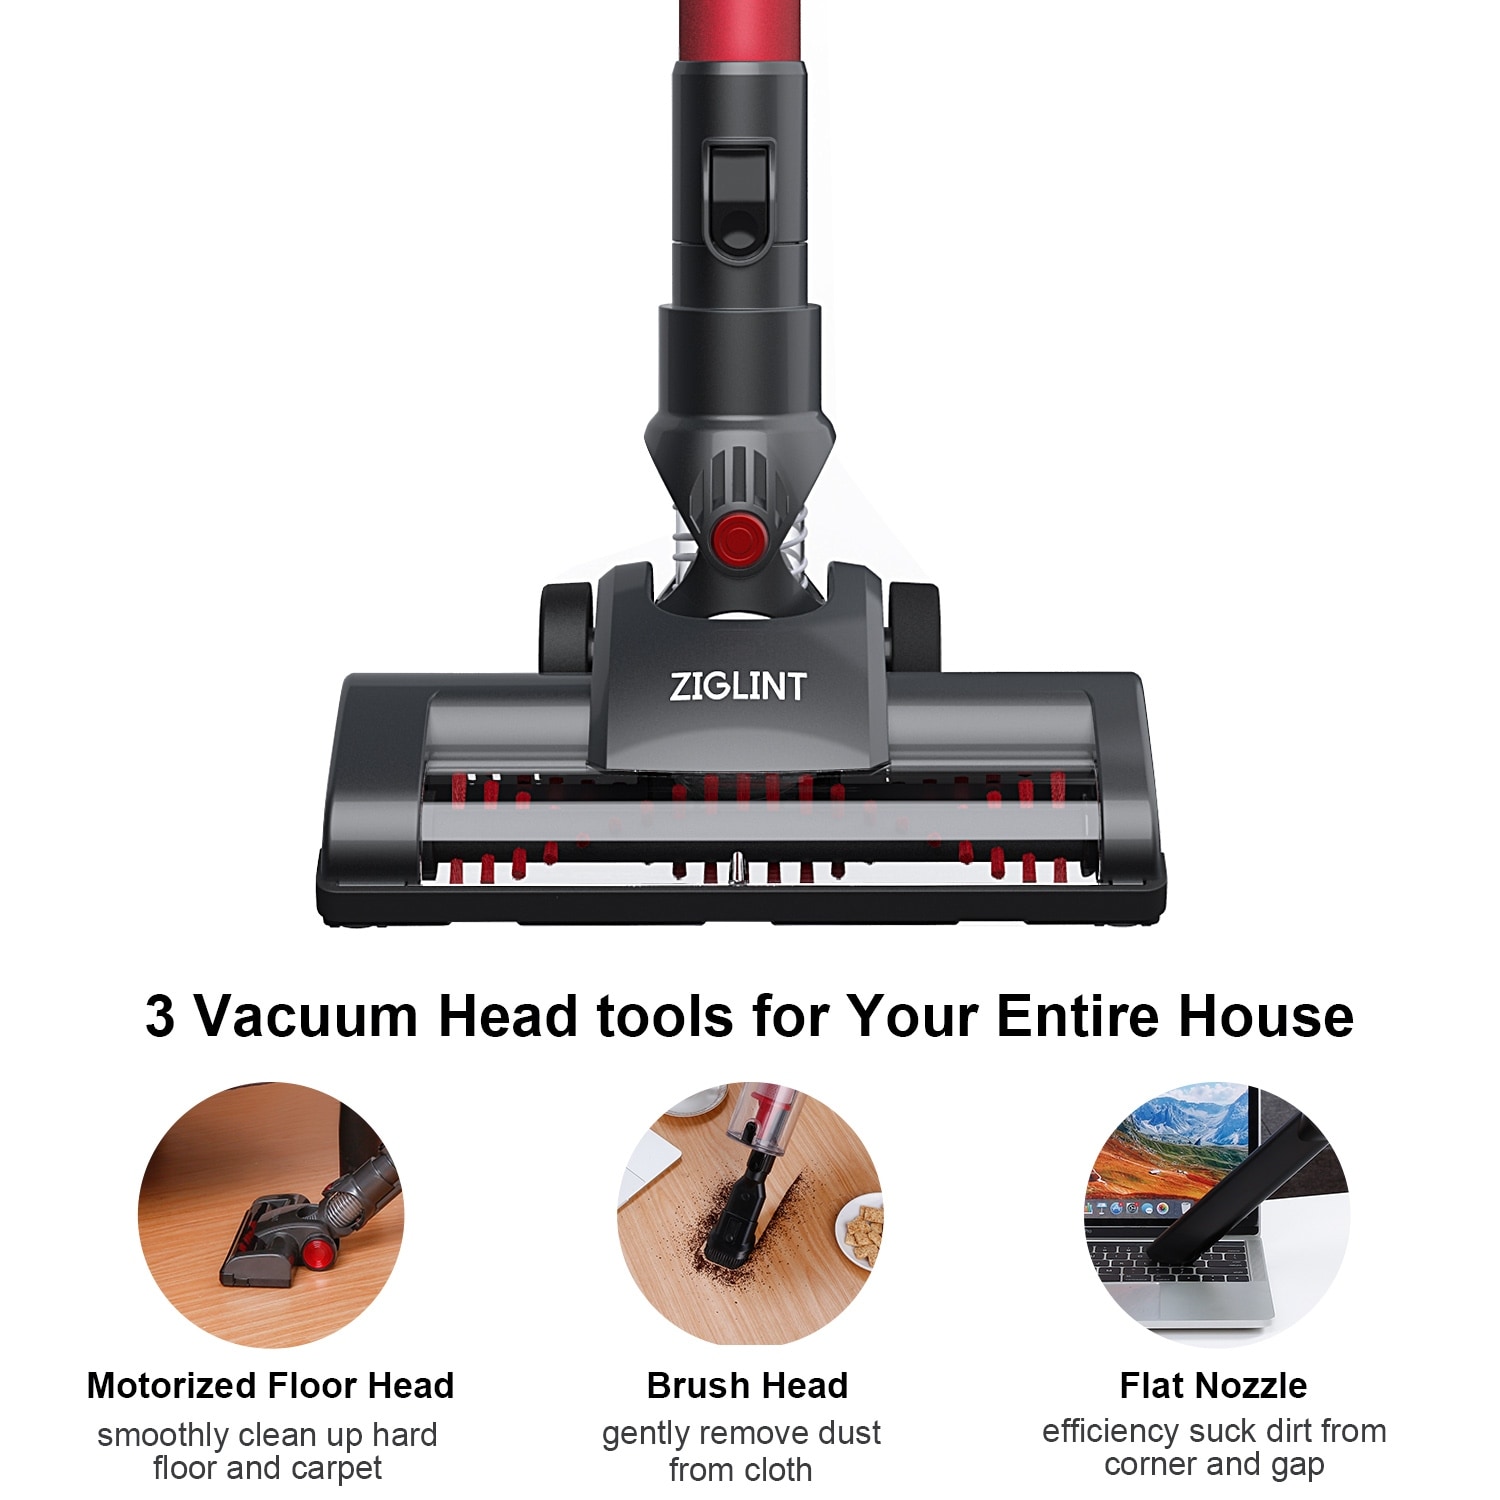 https://ak1.ostkcdn.com/images/products/is/images/direct/31d8c2d11c92379870f049fe8bb88825ffa12a9d/ZIGLINT-Z5-Cordless-Vacuum-Cleaner-2-in-1-Stick-and-Handheld-Portable-Vacuum-with-8KPa-High-Suction.jpg